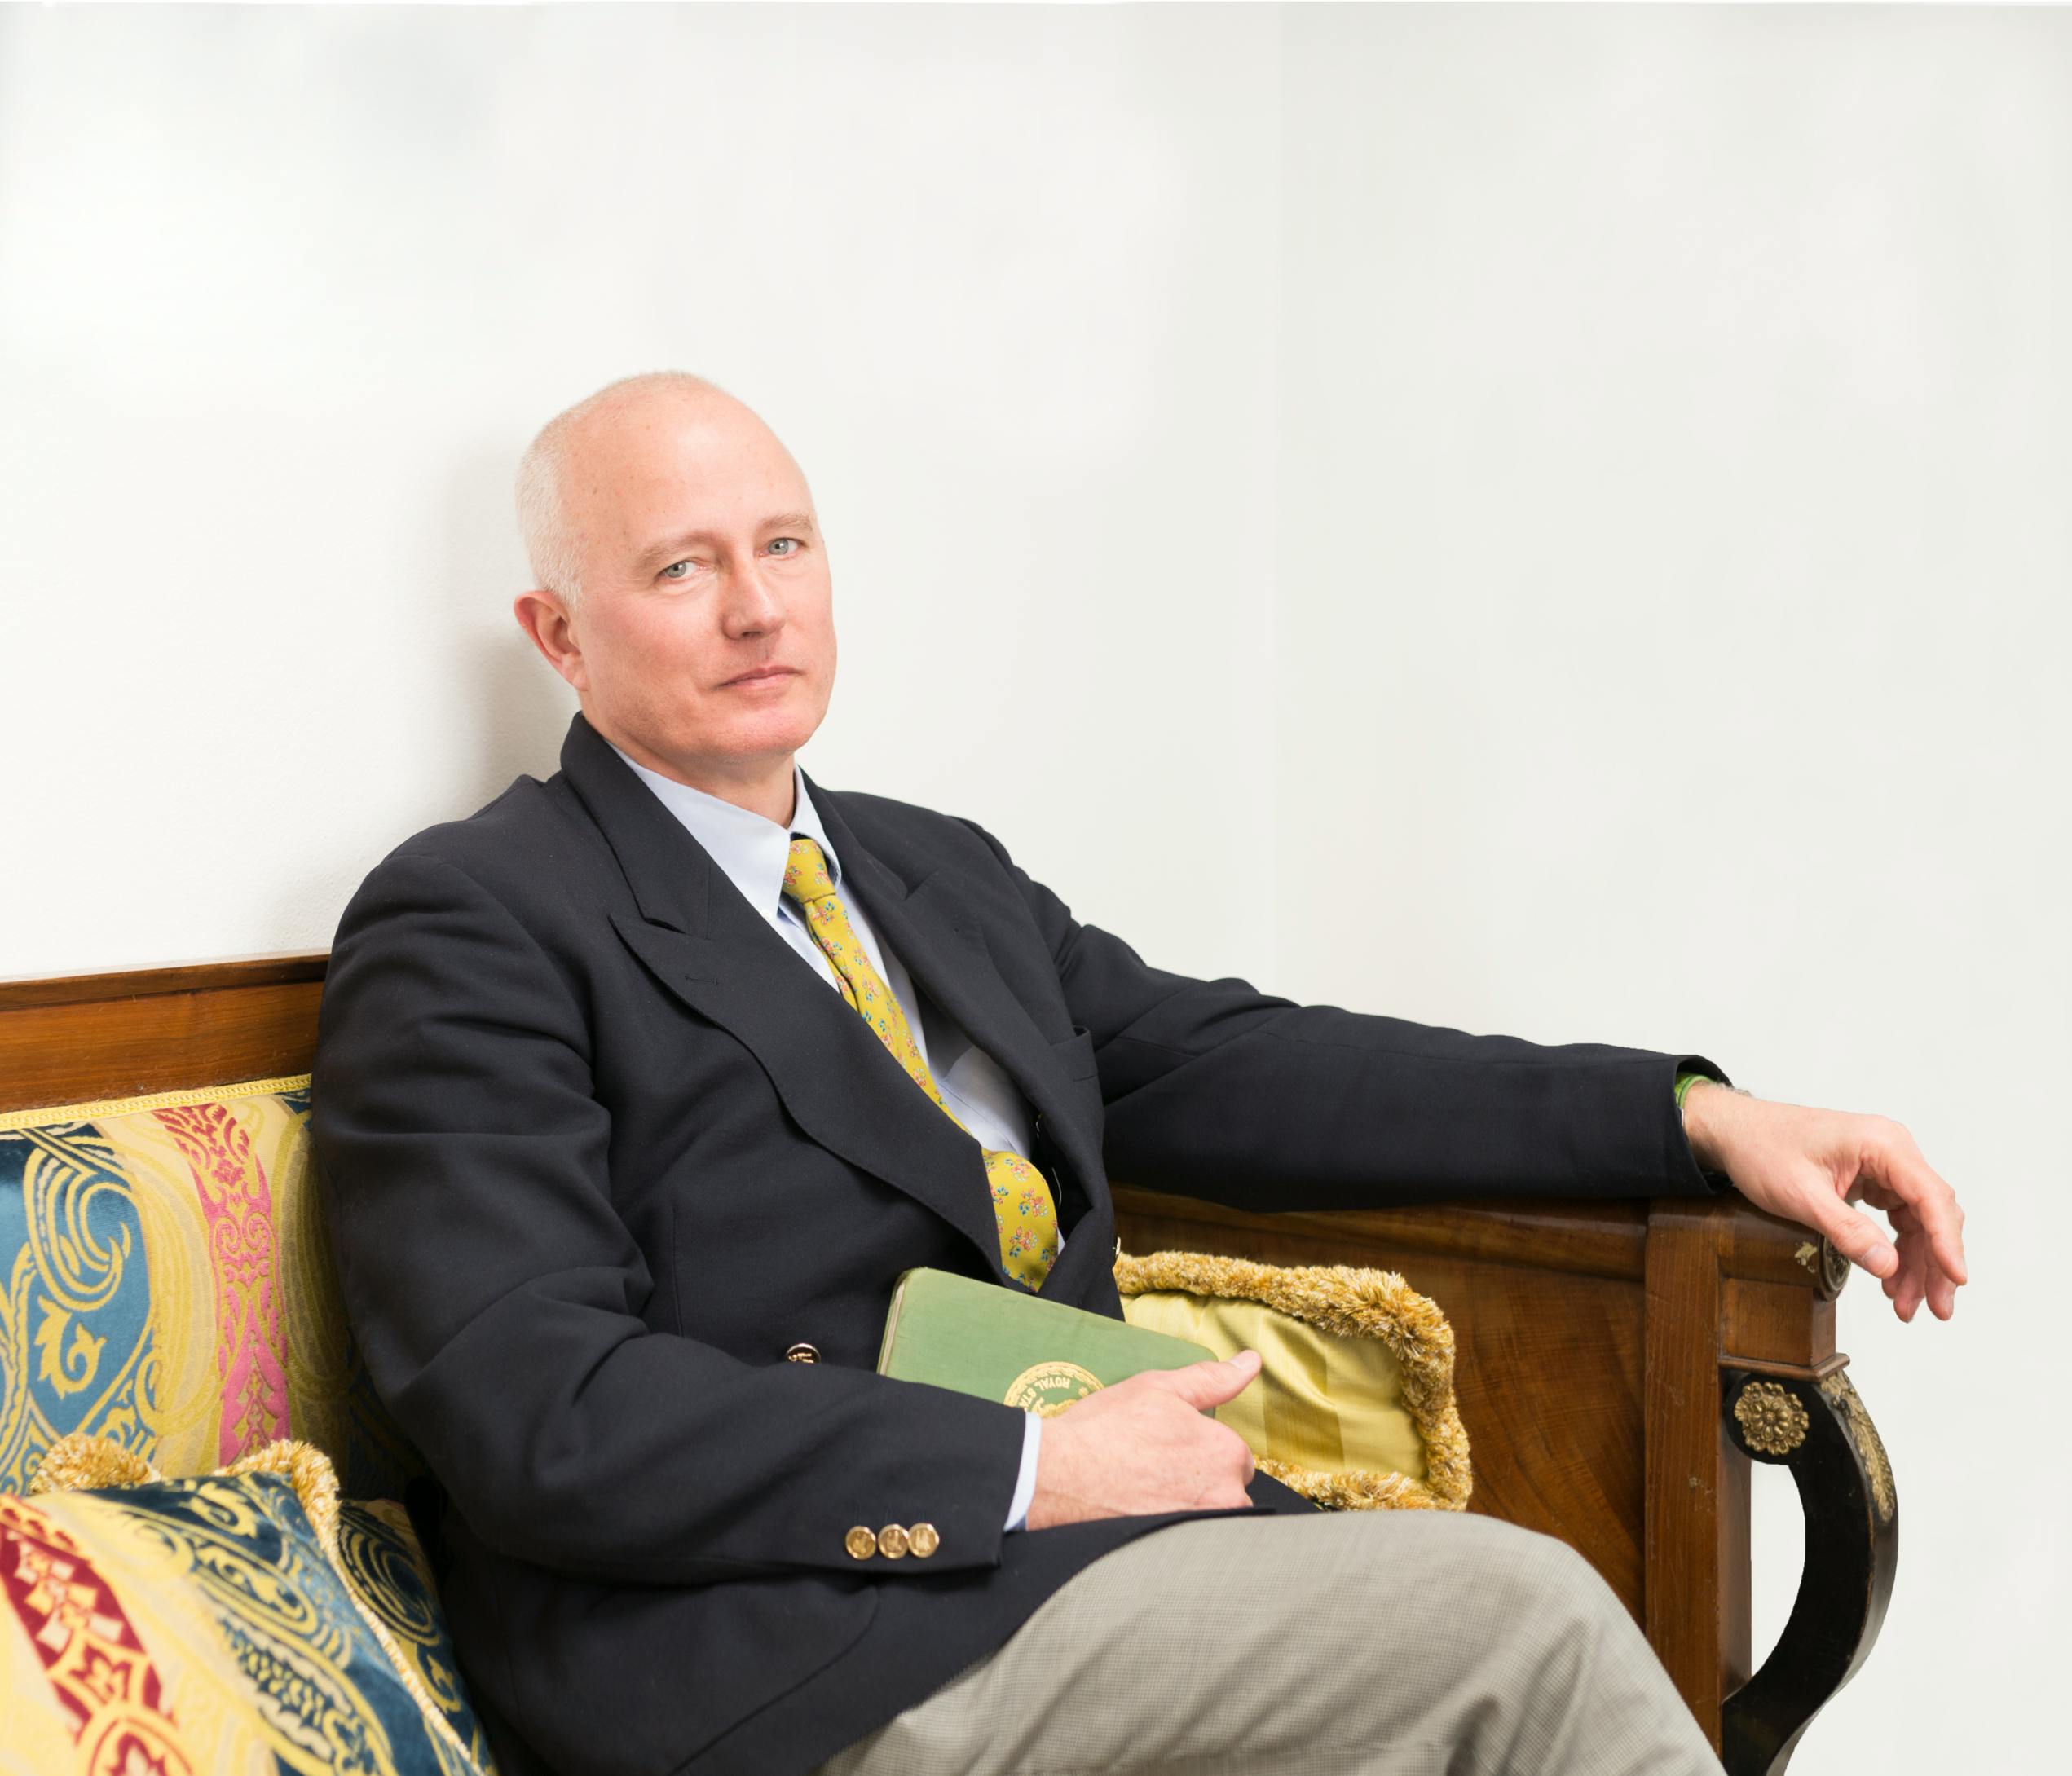 Photo of Dr. Stefano Pallanti sitting in a vintage wooden armchair.